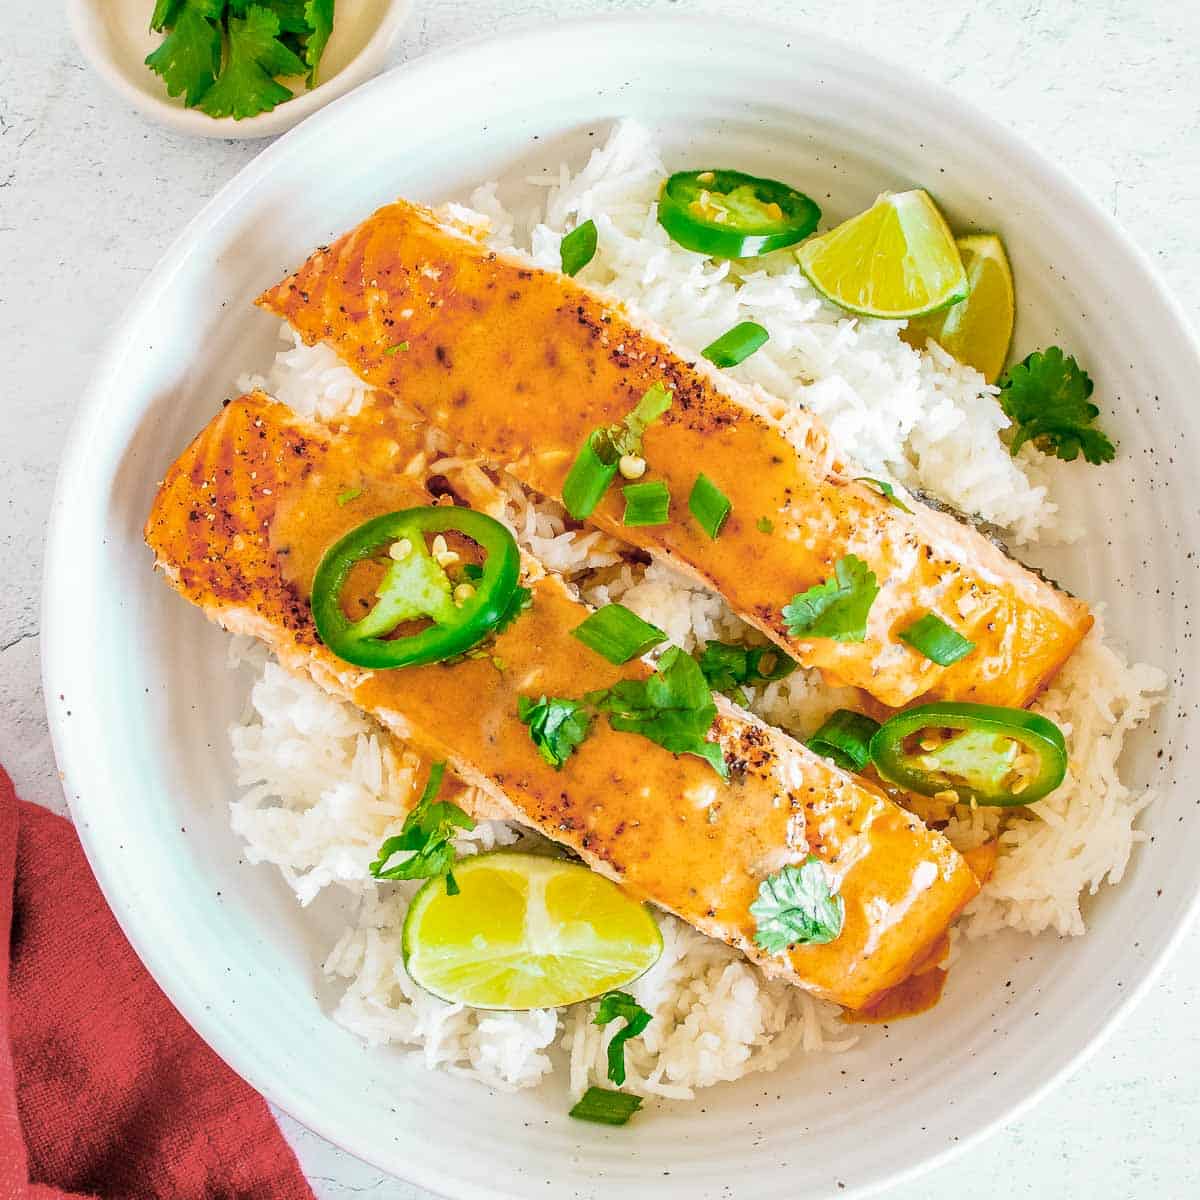 Overhead view of two pieces of salmon on a bed of rice garnished with parsley and cut jalapeños in a large white bowl with lime wedges on the side.